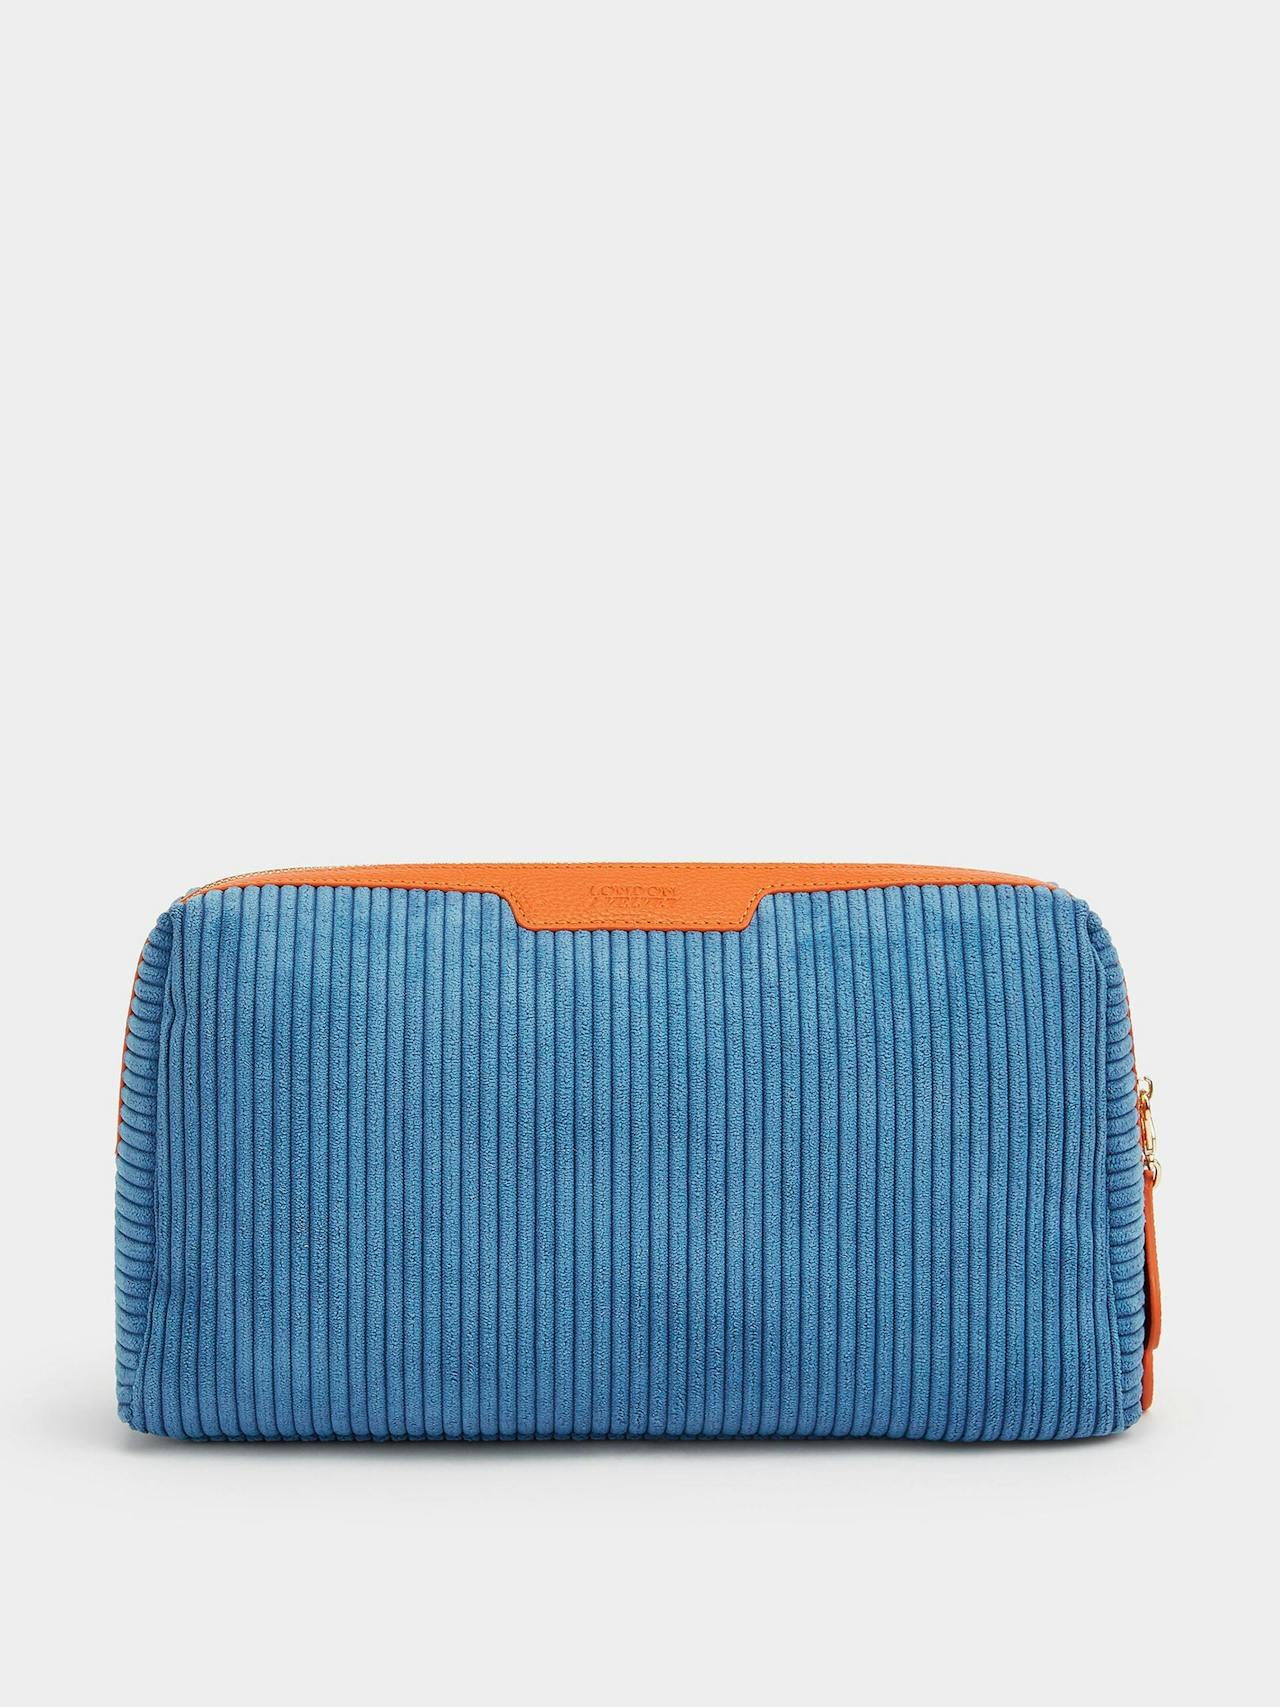 The baby blue Nappy pouch